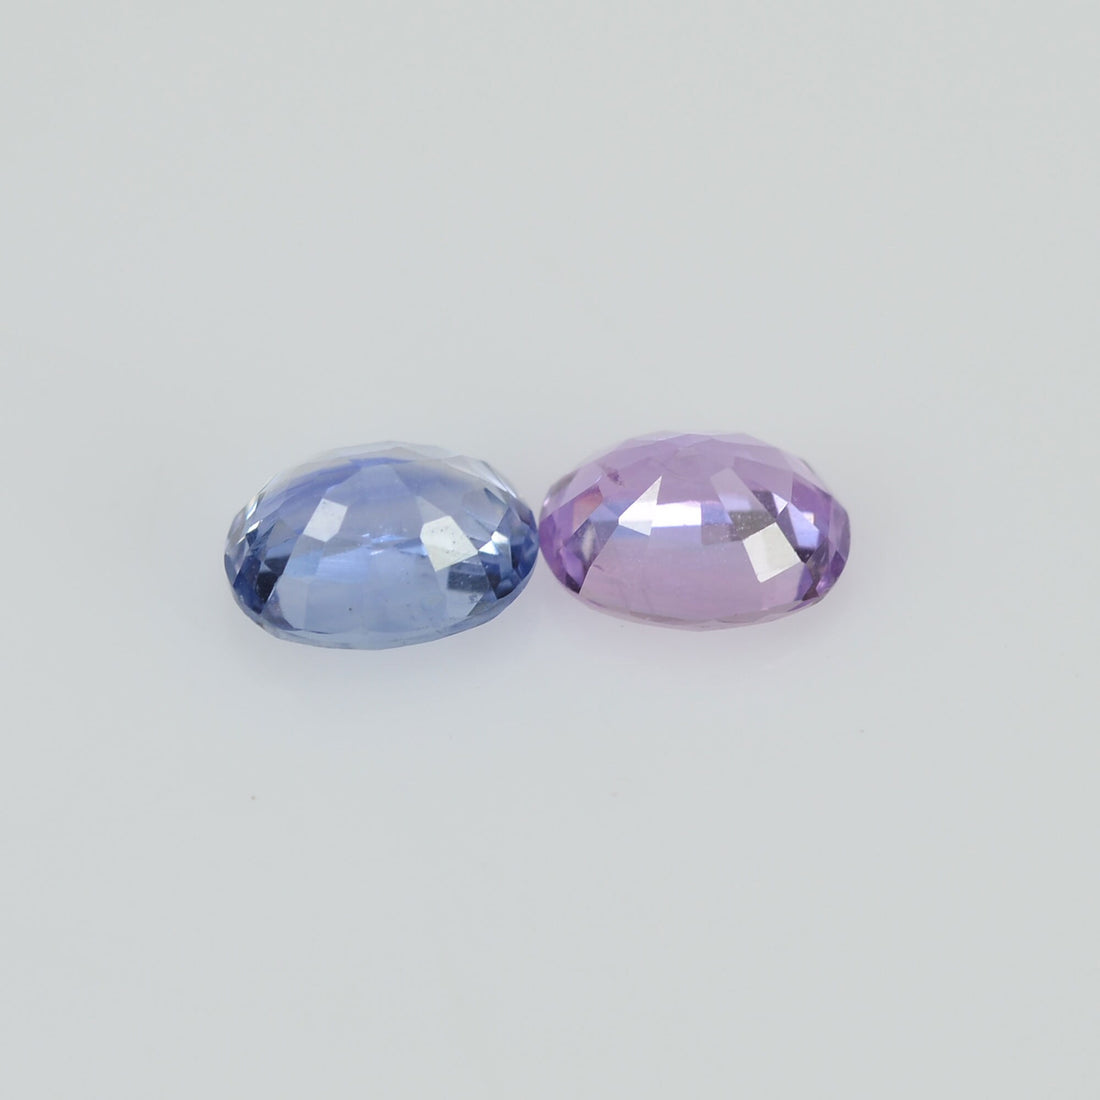 0.63 cts Natural Fancy Sapphire Loose Pair Gemstone Oval Cut